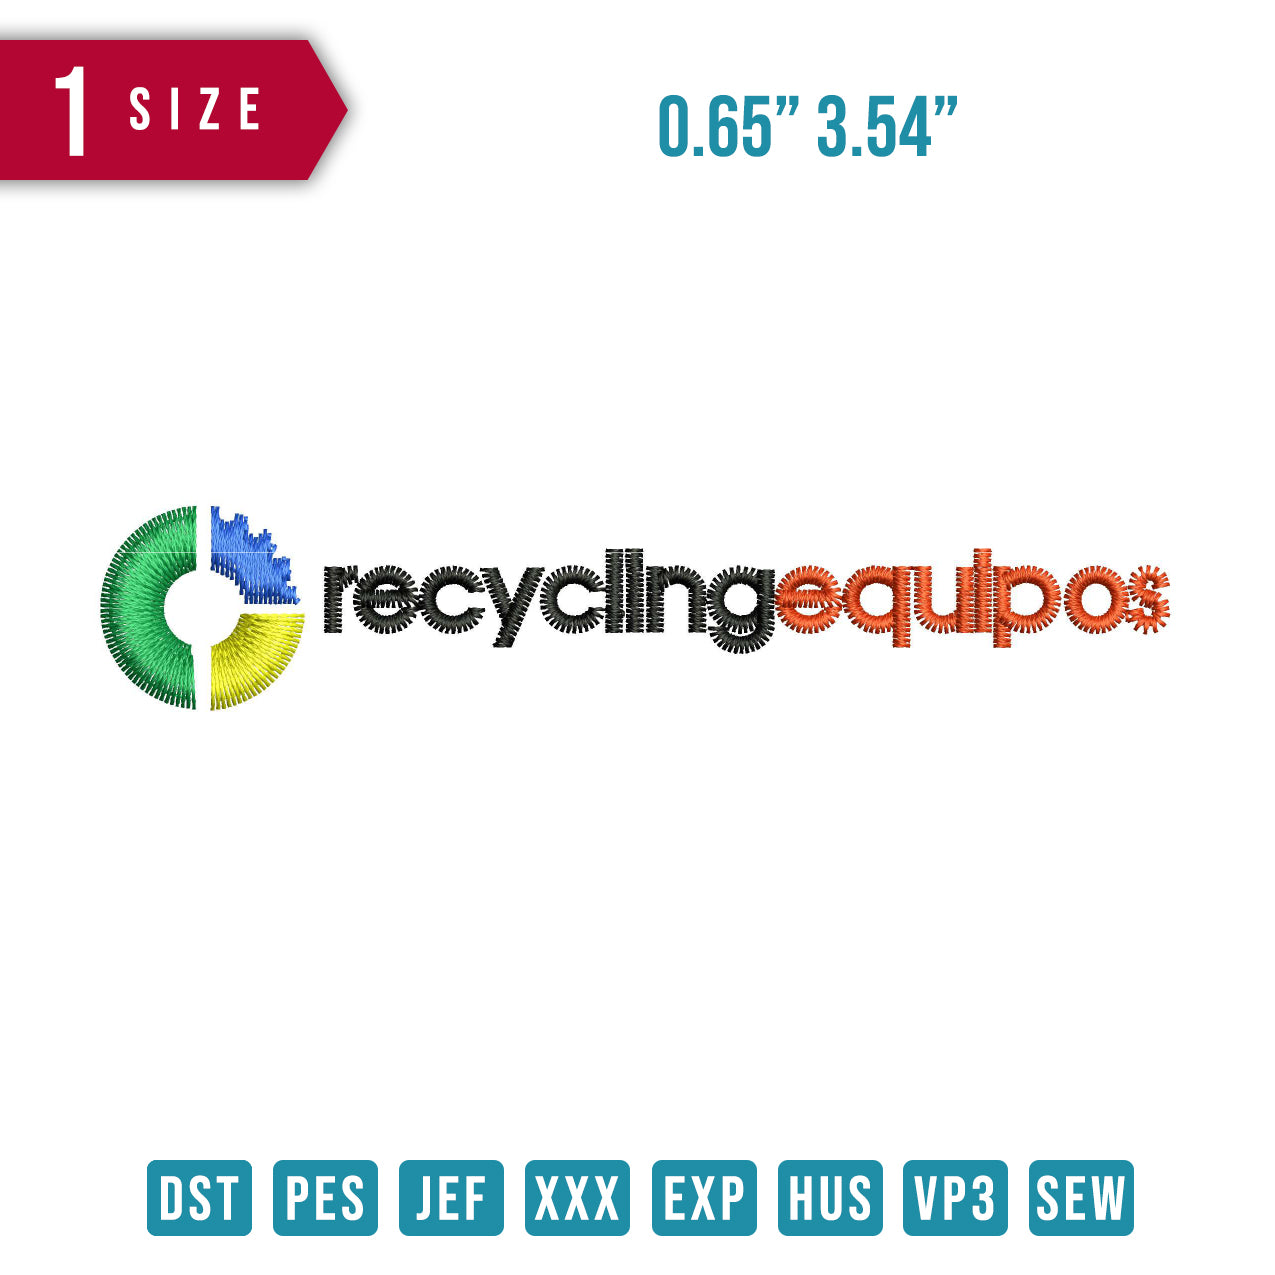 Recycling Equipos